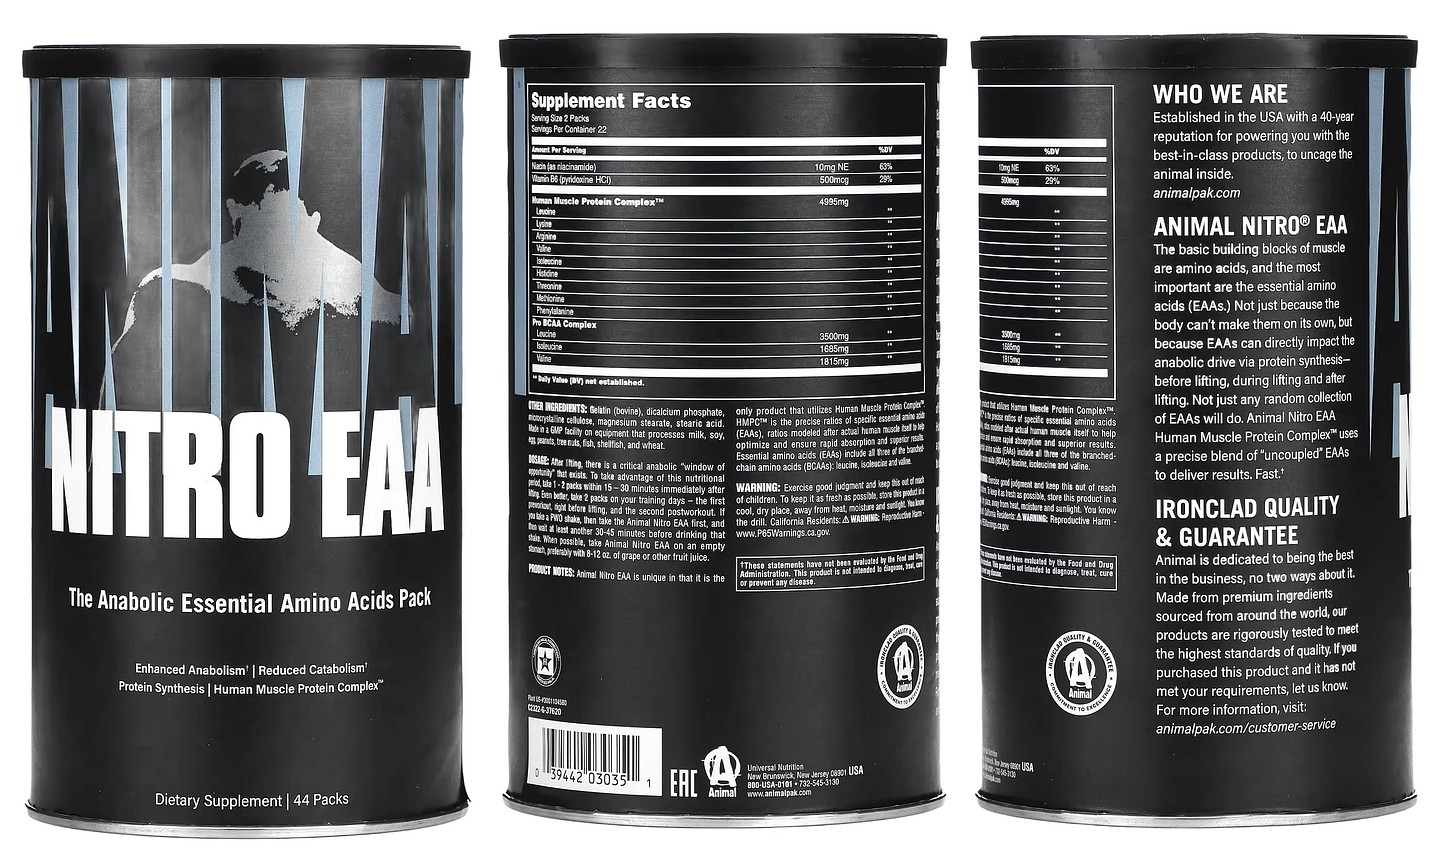 Animal, Nitro EAA, The Anabolic Essential Amino Acids Pack packaging